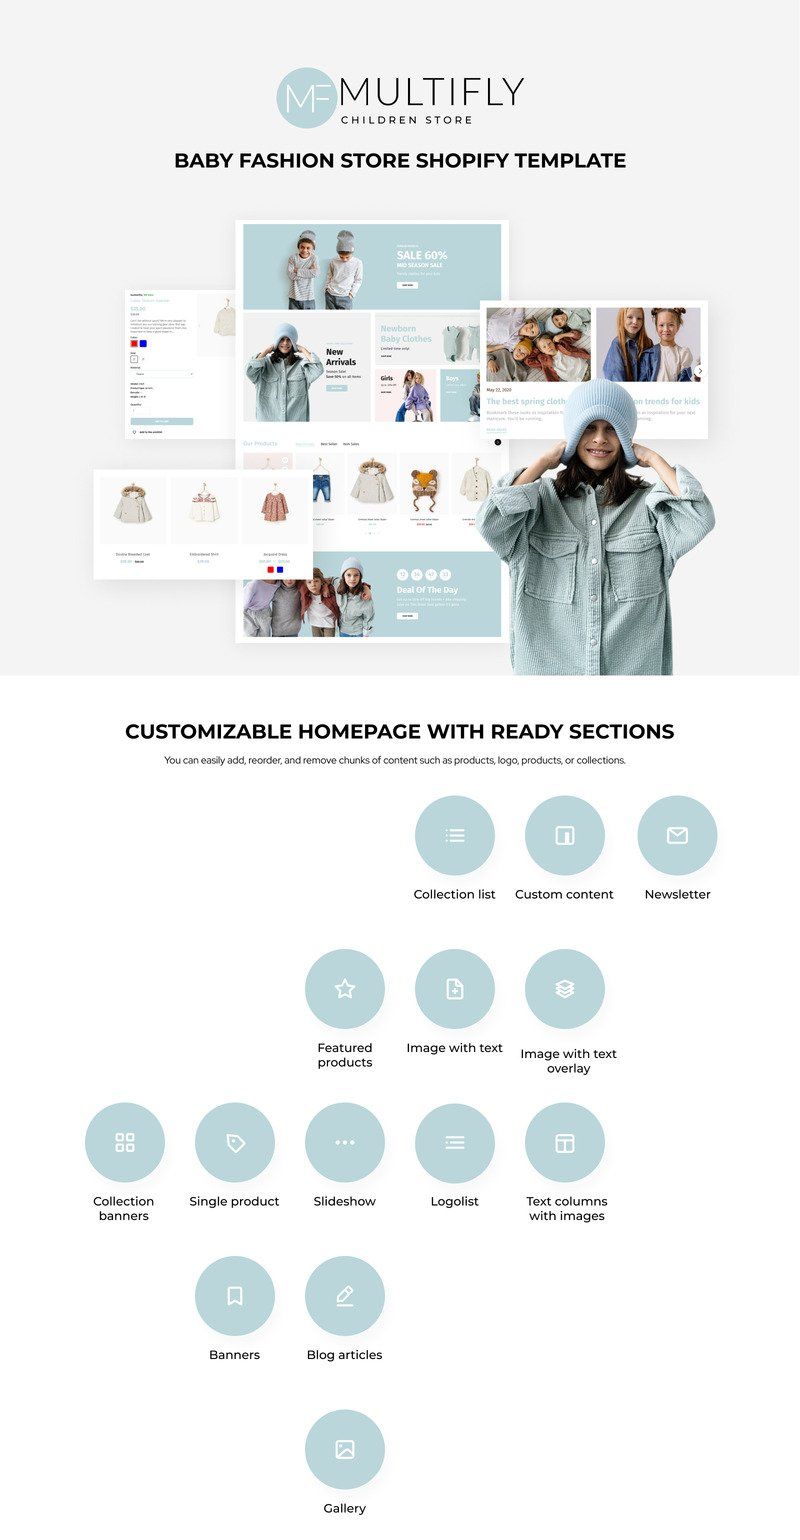 Multifly Baby Fashion Store Shopify Theme - Features Image 1